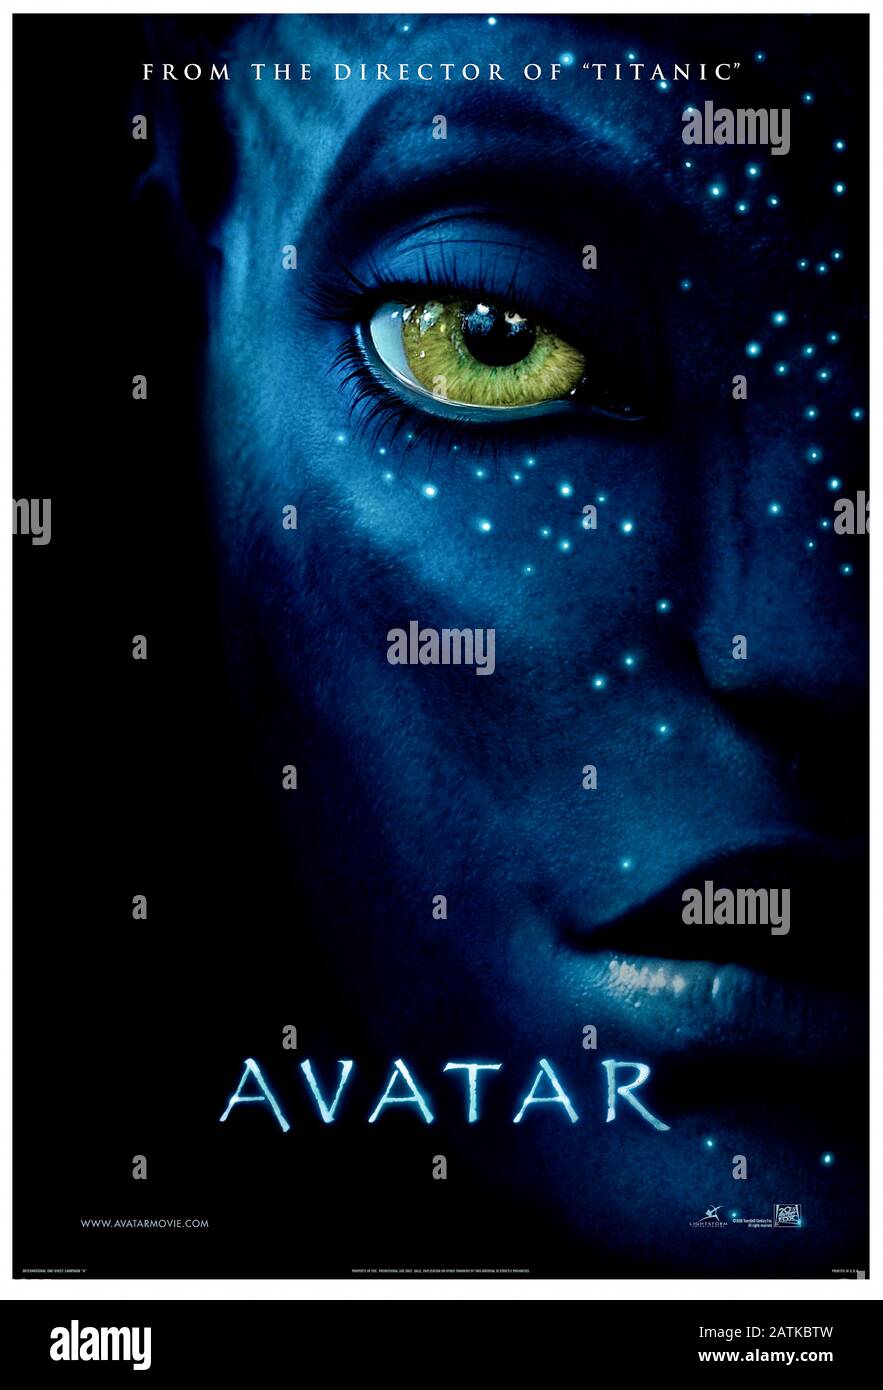 Avatar (2009) directed by James Cameron and starring Sam Worthington, Zoe Saldana, Sigourney Weaver and Stephen Lang. Groundbreaking 3D epic science fiction about a paraplegic Marine inhabits the body of a genetically engineered Na'vi, a species native to Pandora. Stock Photo